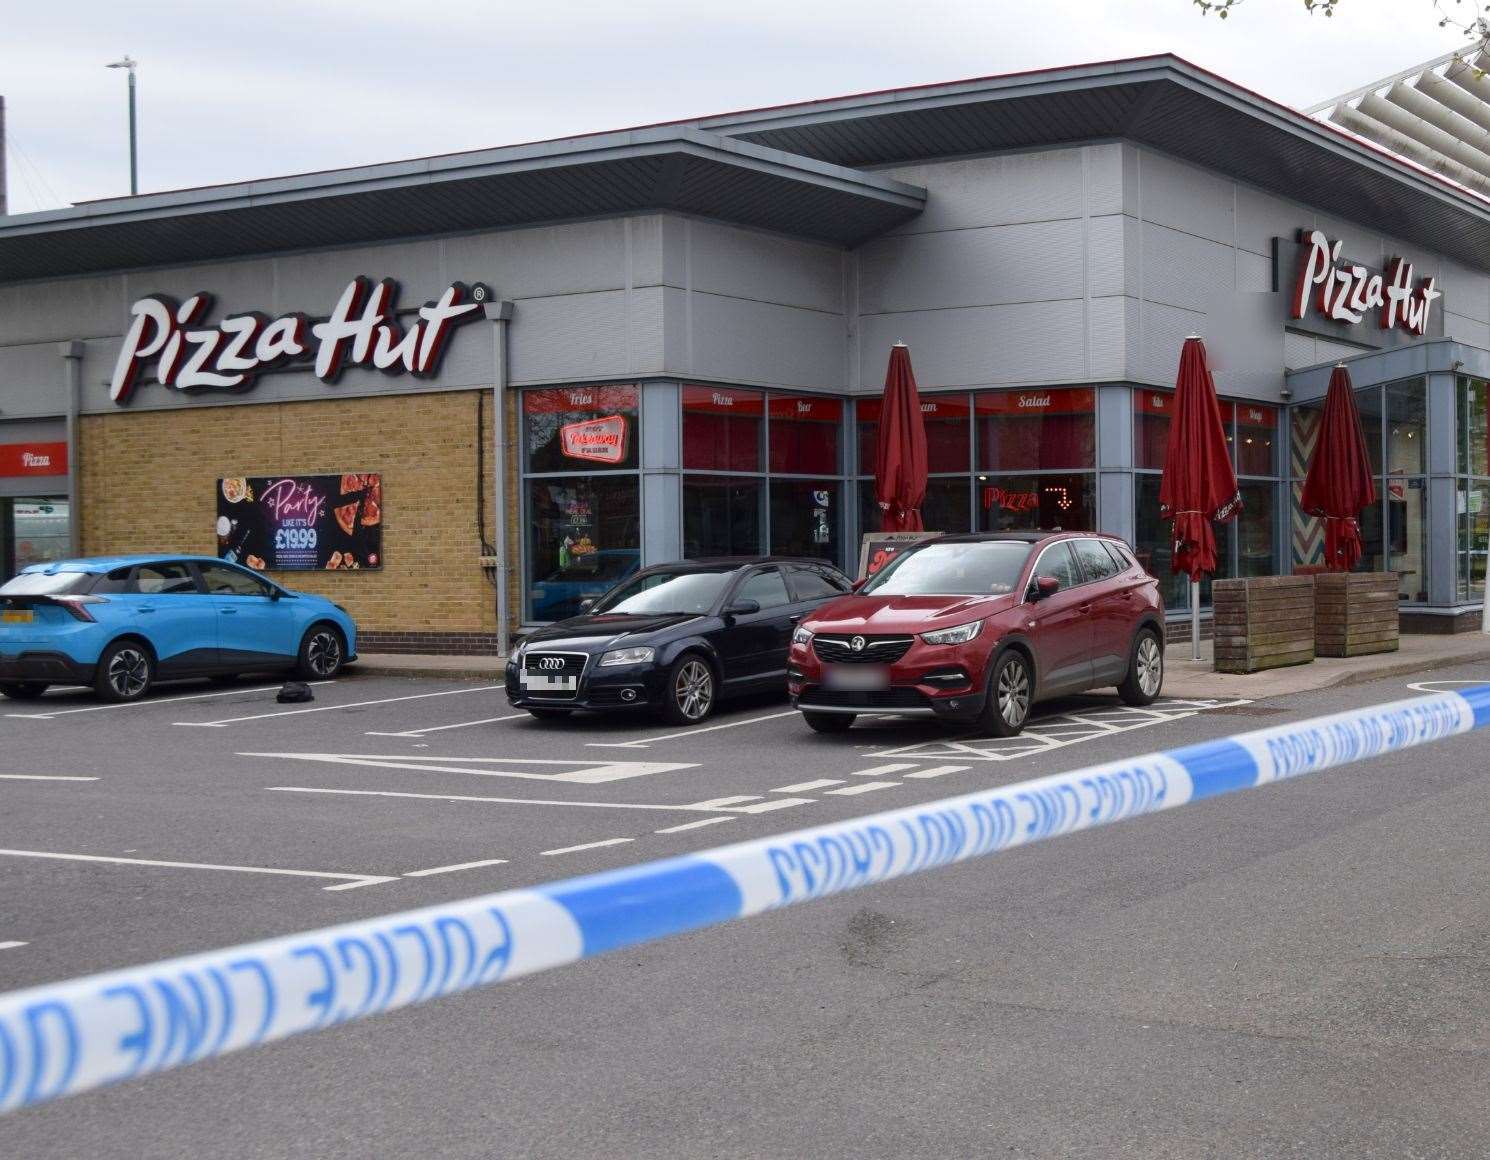 Prospect Place retail park in Dartford was cordoned off after a "suspicious" package was found near Pizza Hut